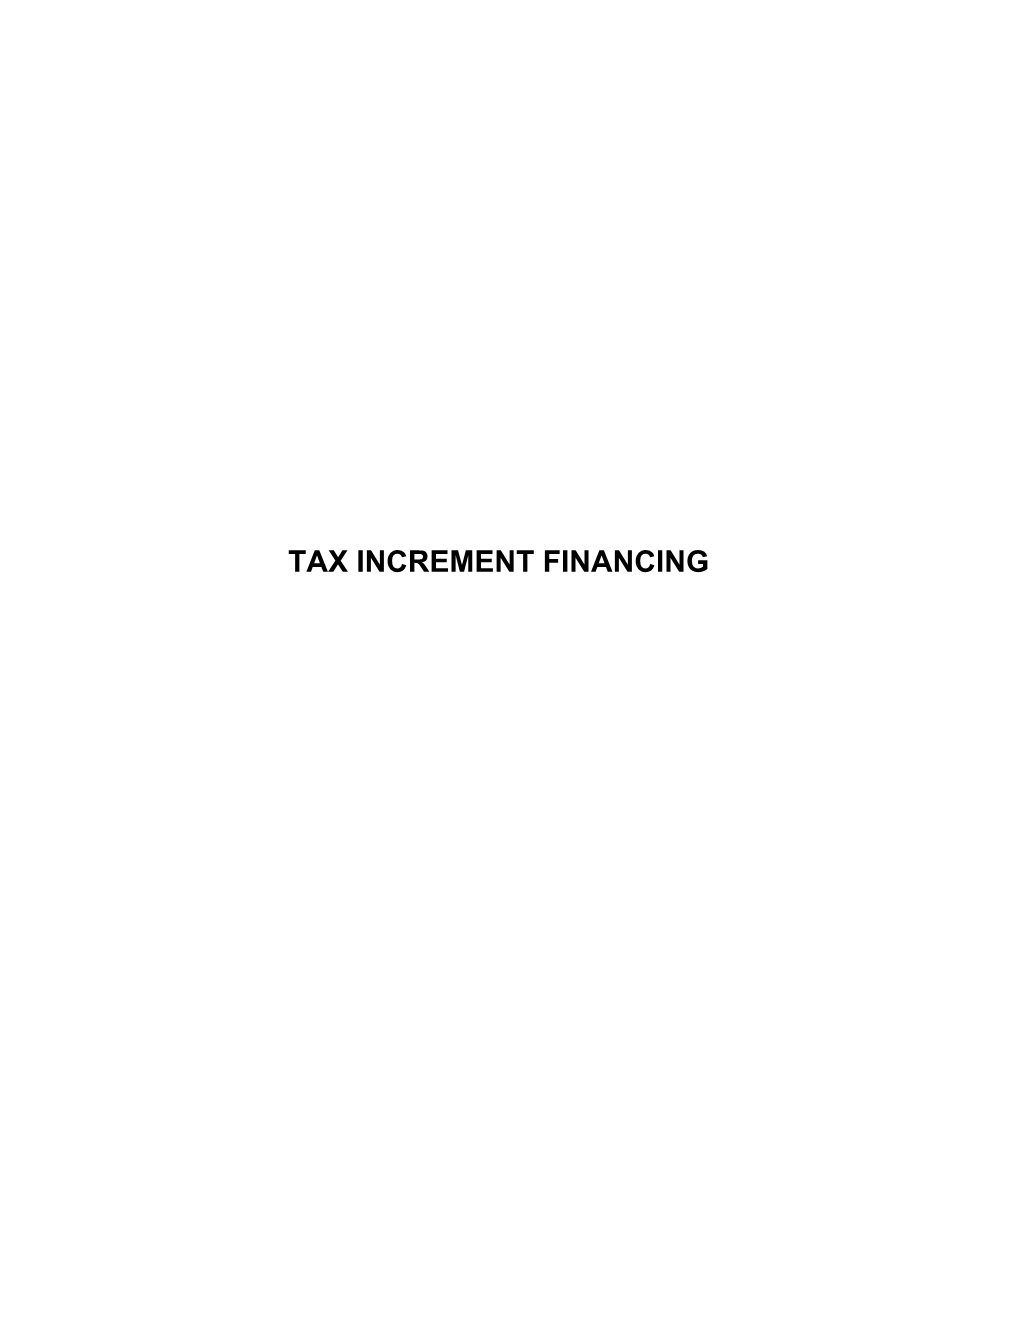 Tax Increment Financing